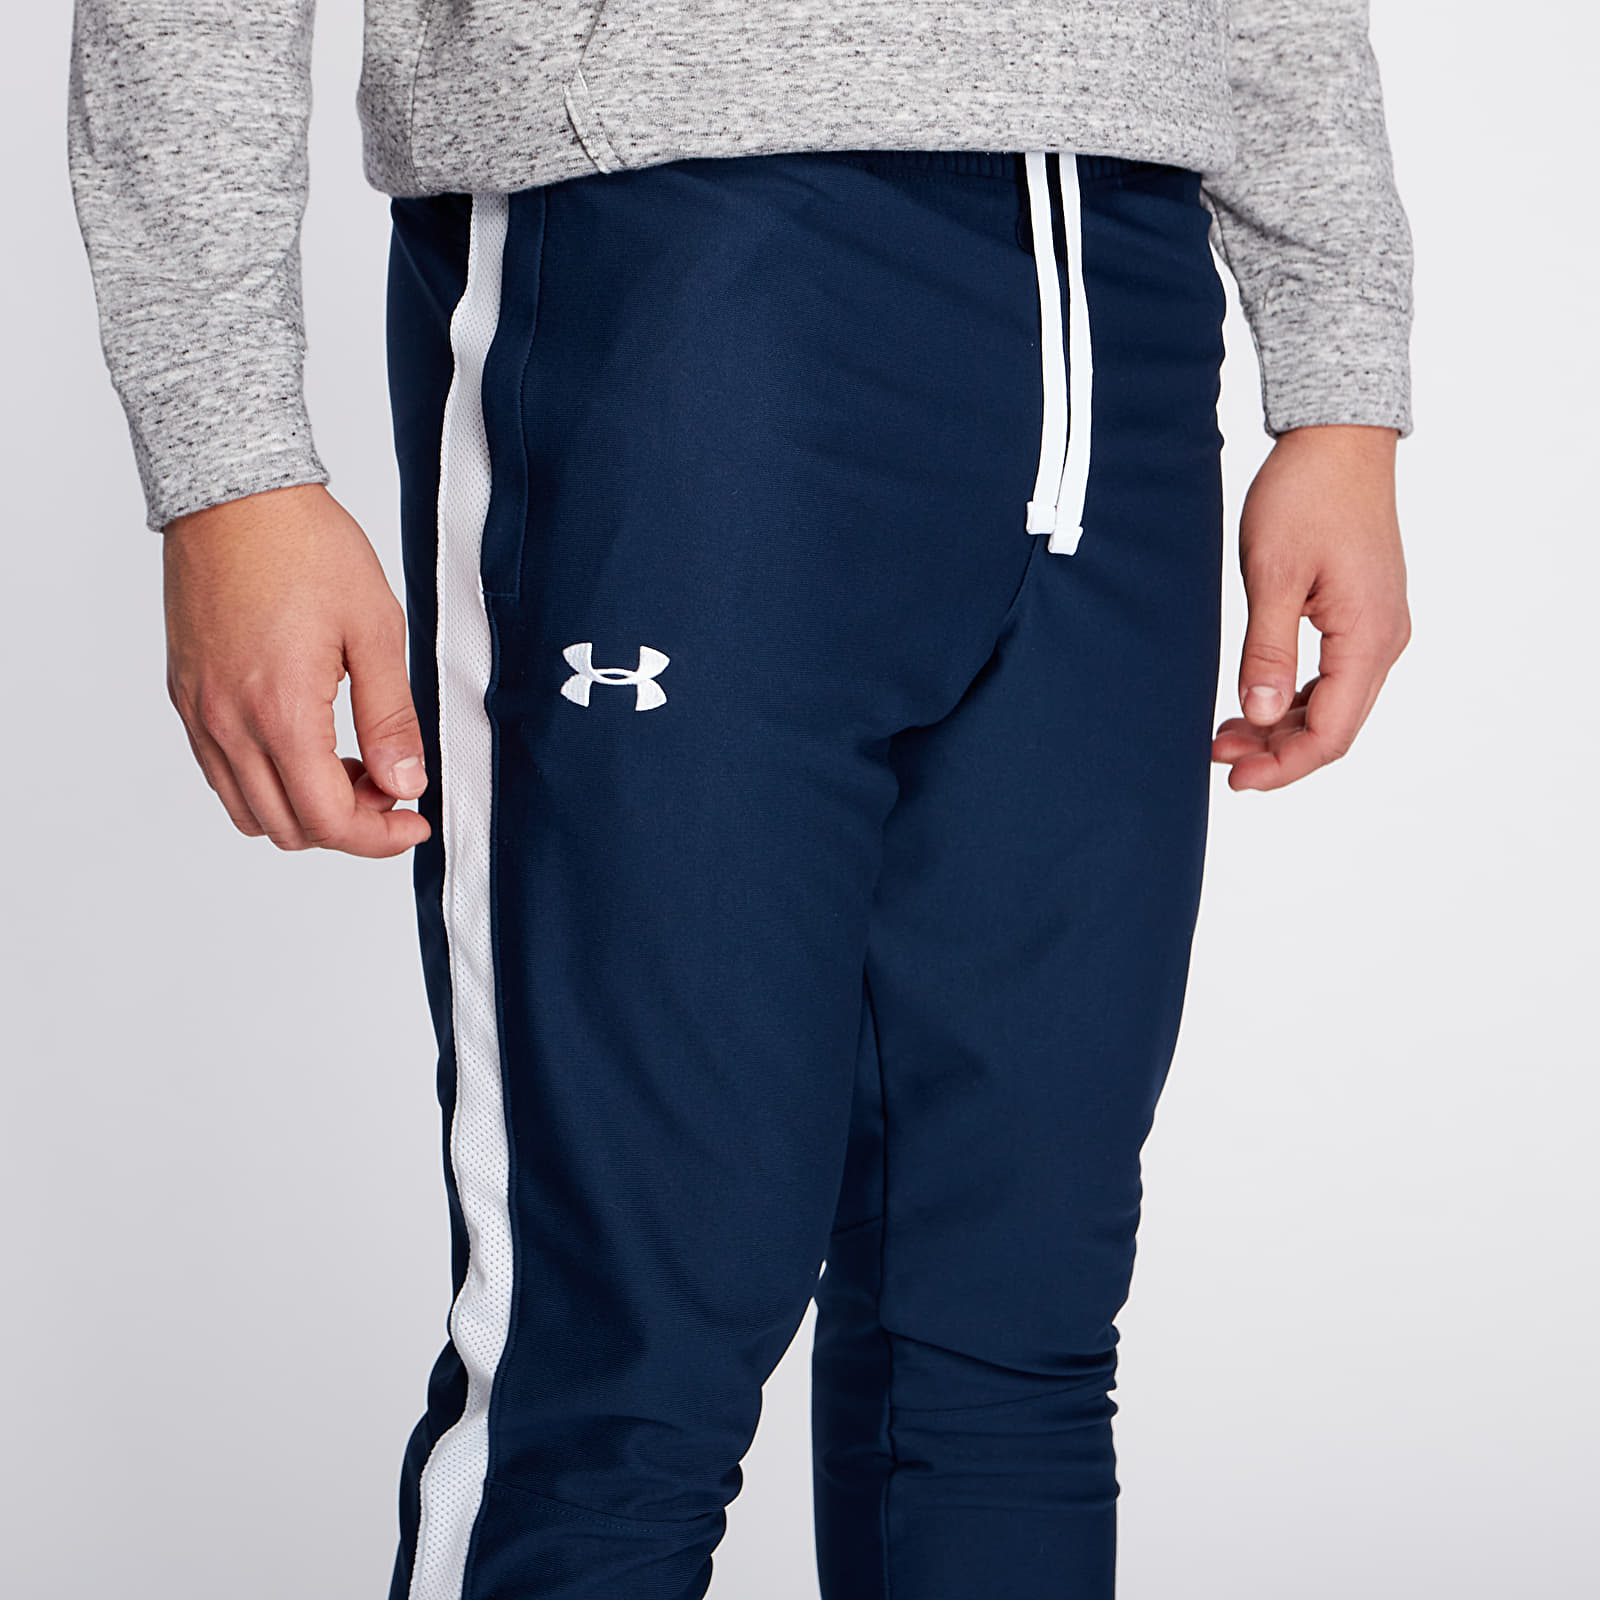 Under Armour Pique Track Pants Academy/White 1366203-408 - Free